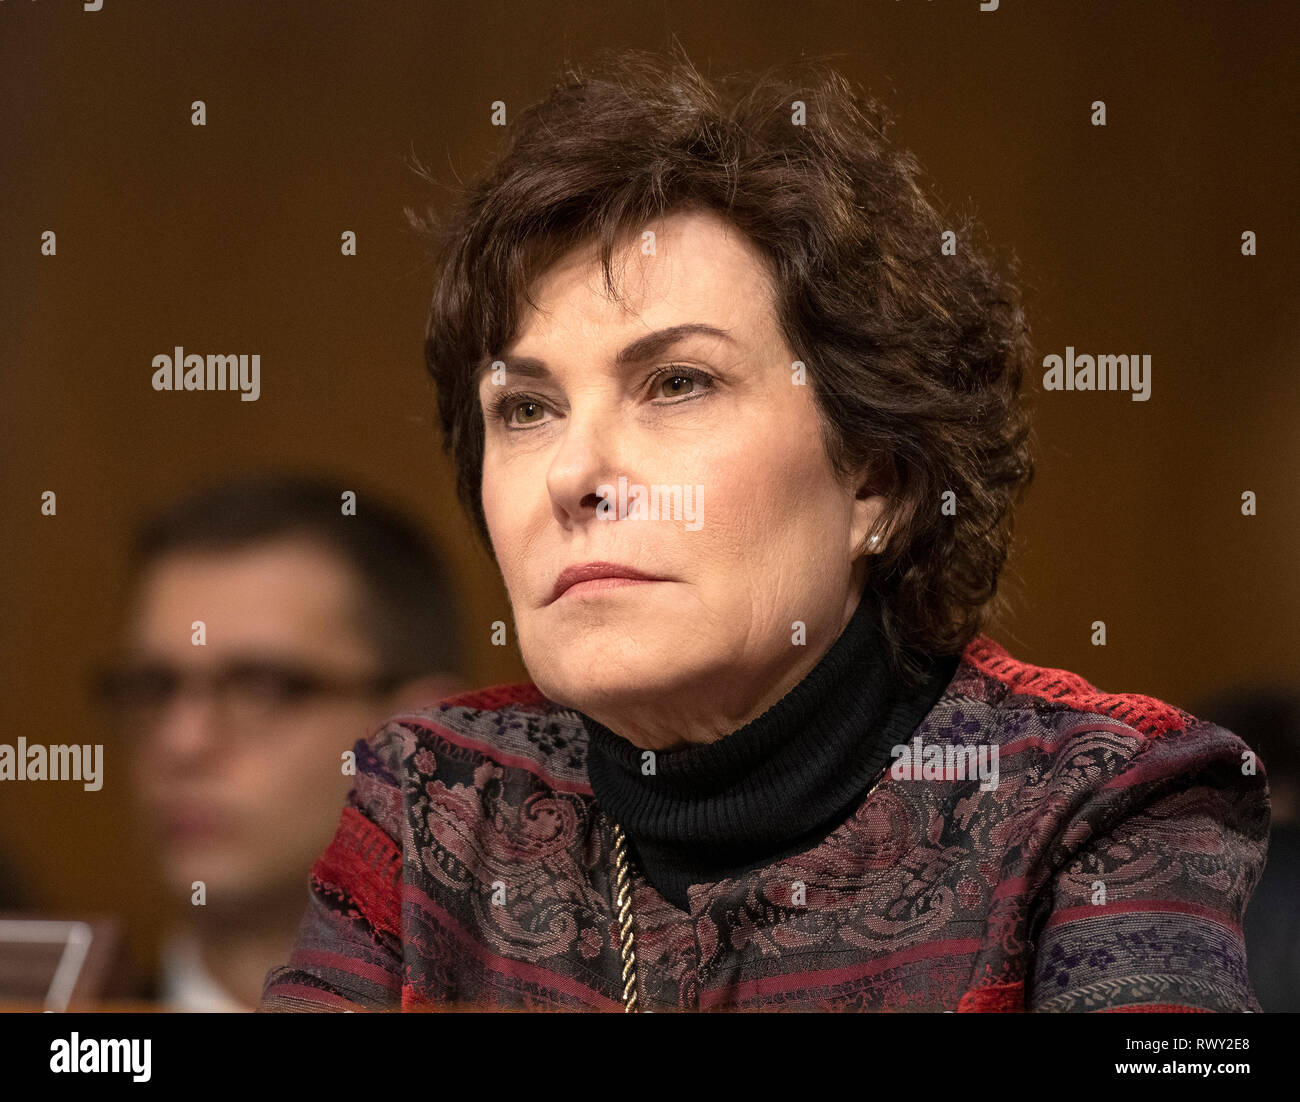 United States Senator Jacky Rosen (Democrat of Nevada) listens to the testimony before the US Senate Committee on Homeland Security and Governmental Affairs Permanent Subcommittee on Investigations during a hearing on 'Examining Private Sector Data Breaches' on Capitol Hill in Washington, DC on Thursday, March 7, 2019. Credit: Ron Sachs/CNP /MediaPunch Stock Photo